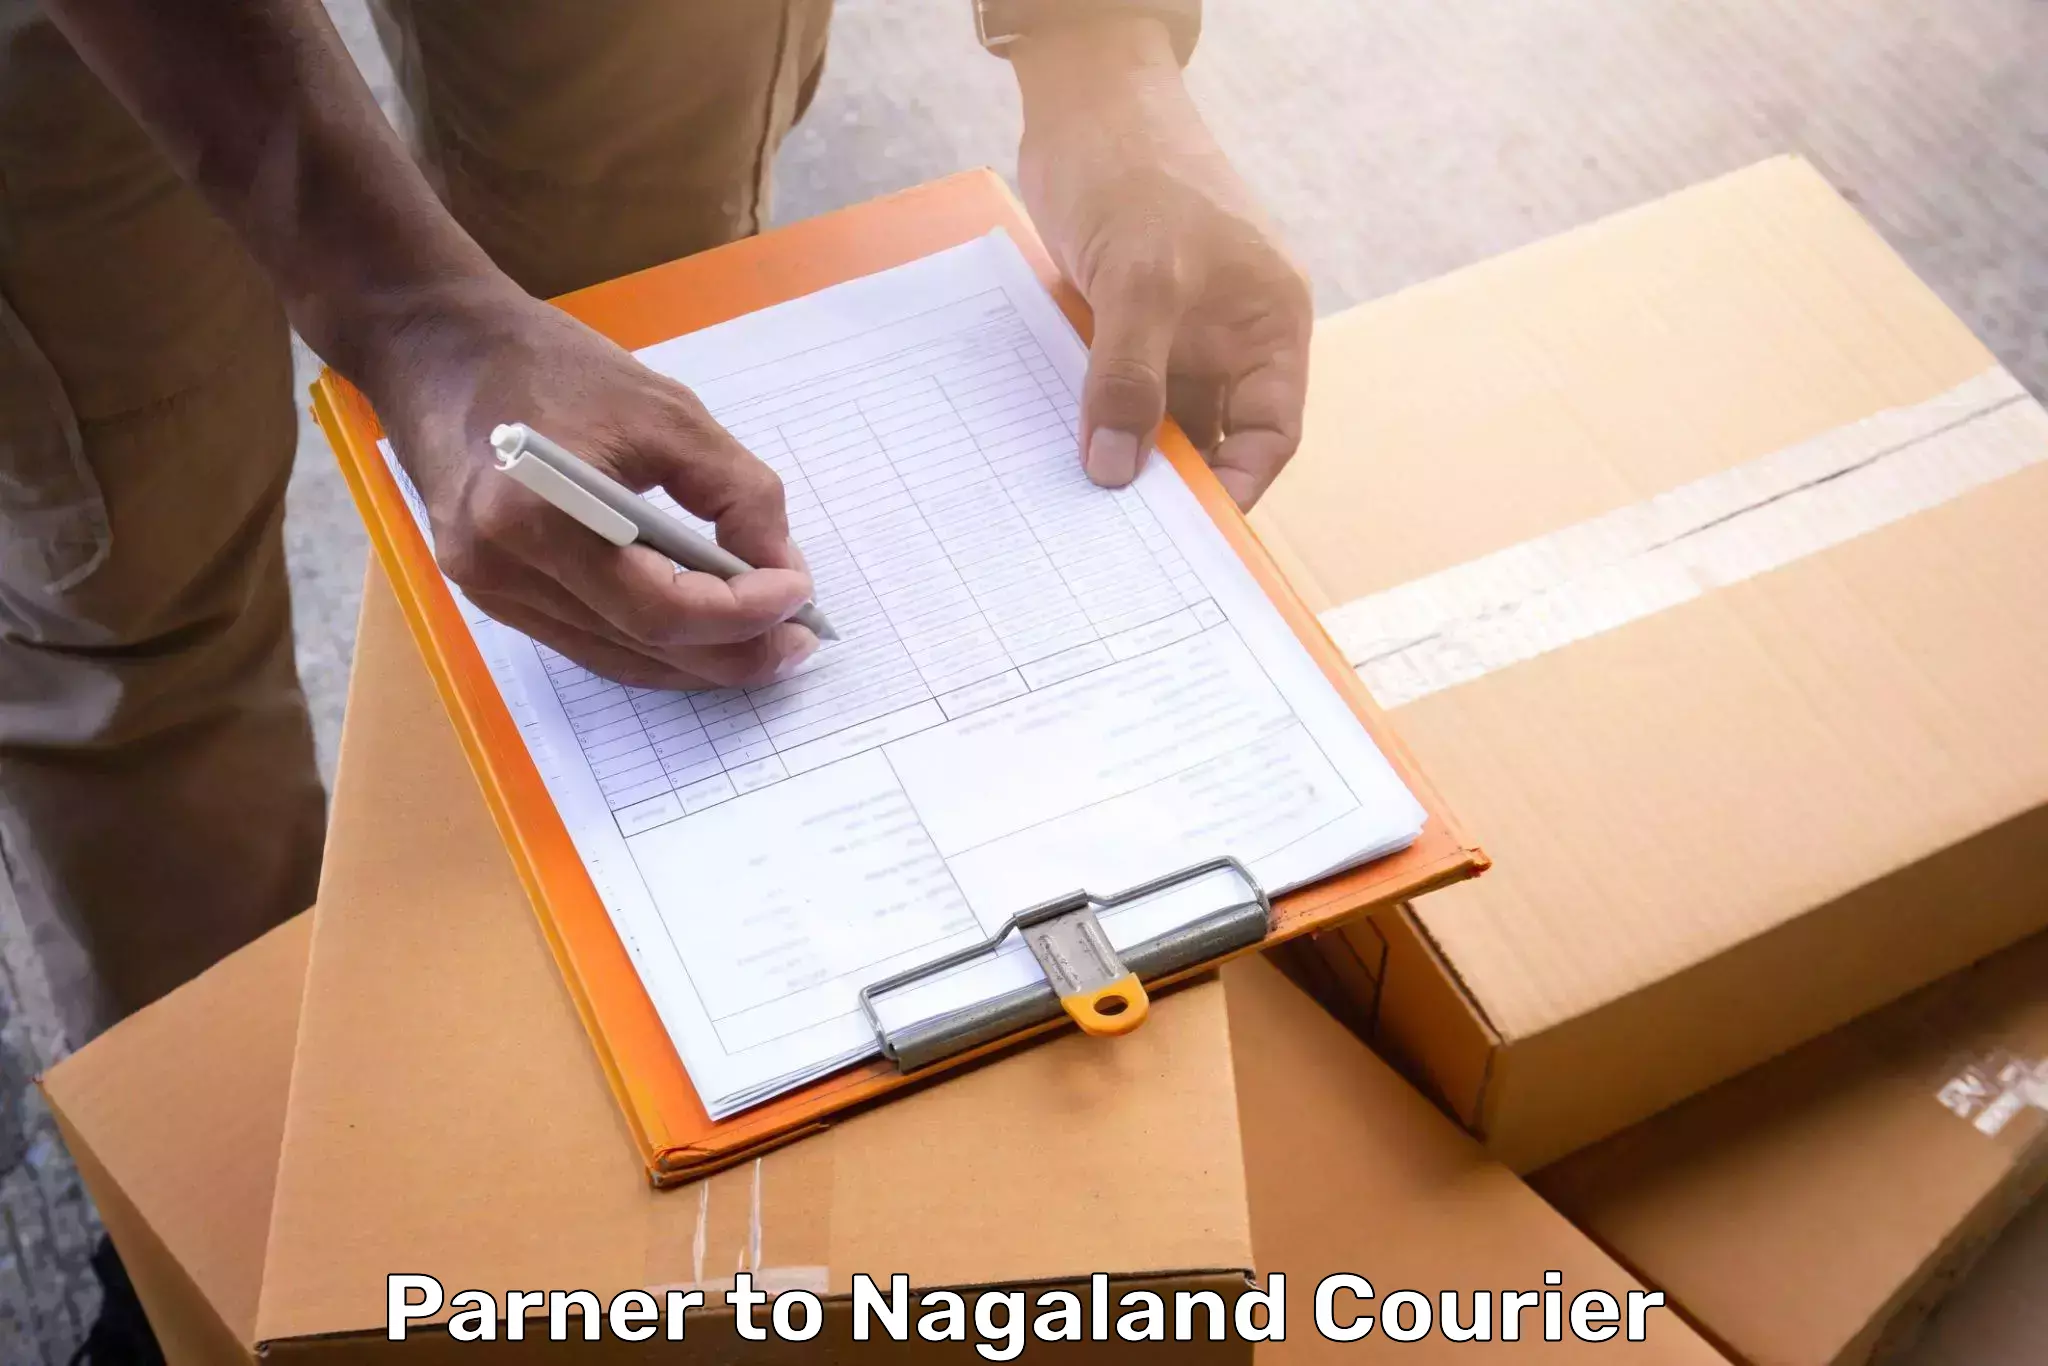 Luggage transport consultancy Parner to Nagaland